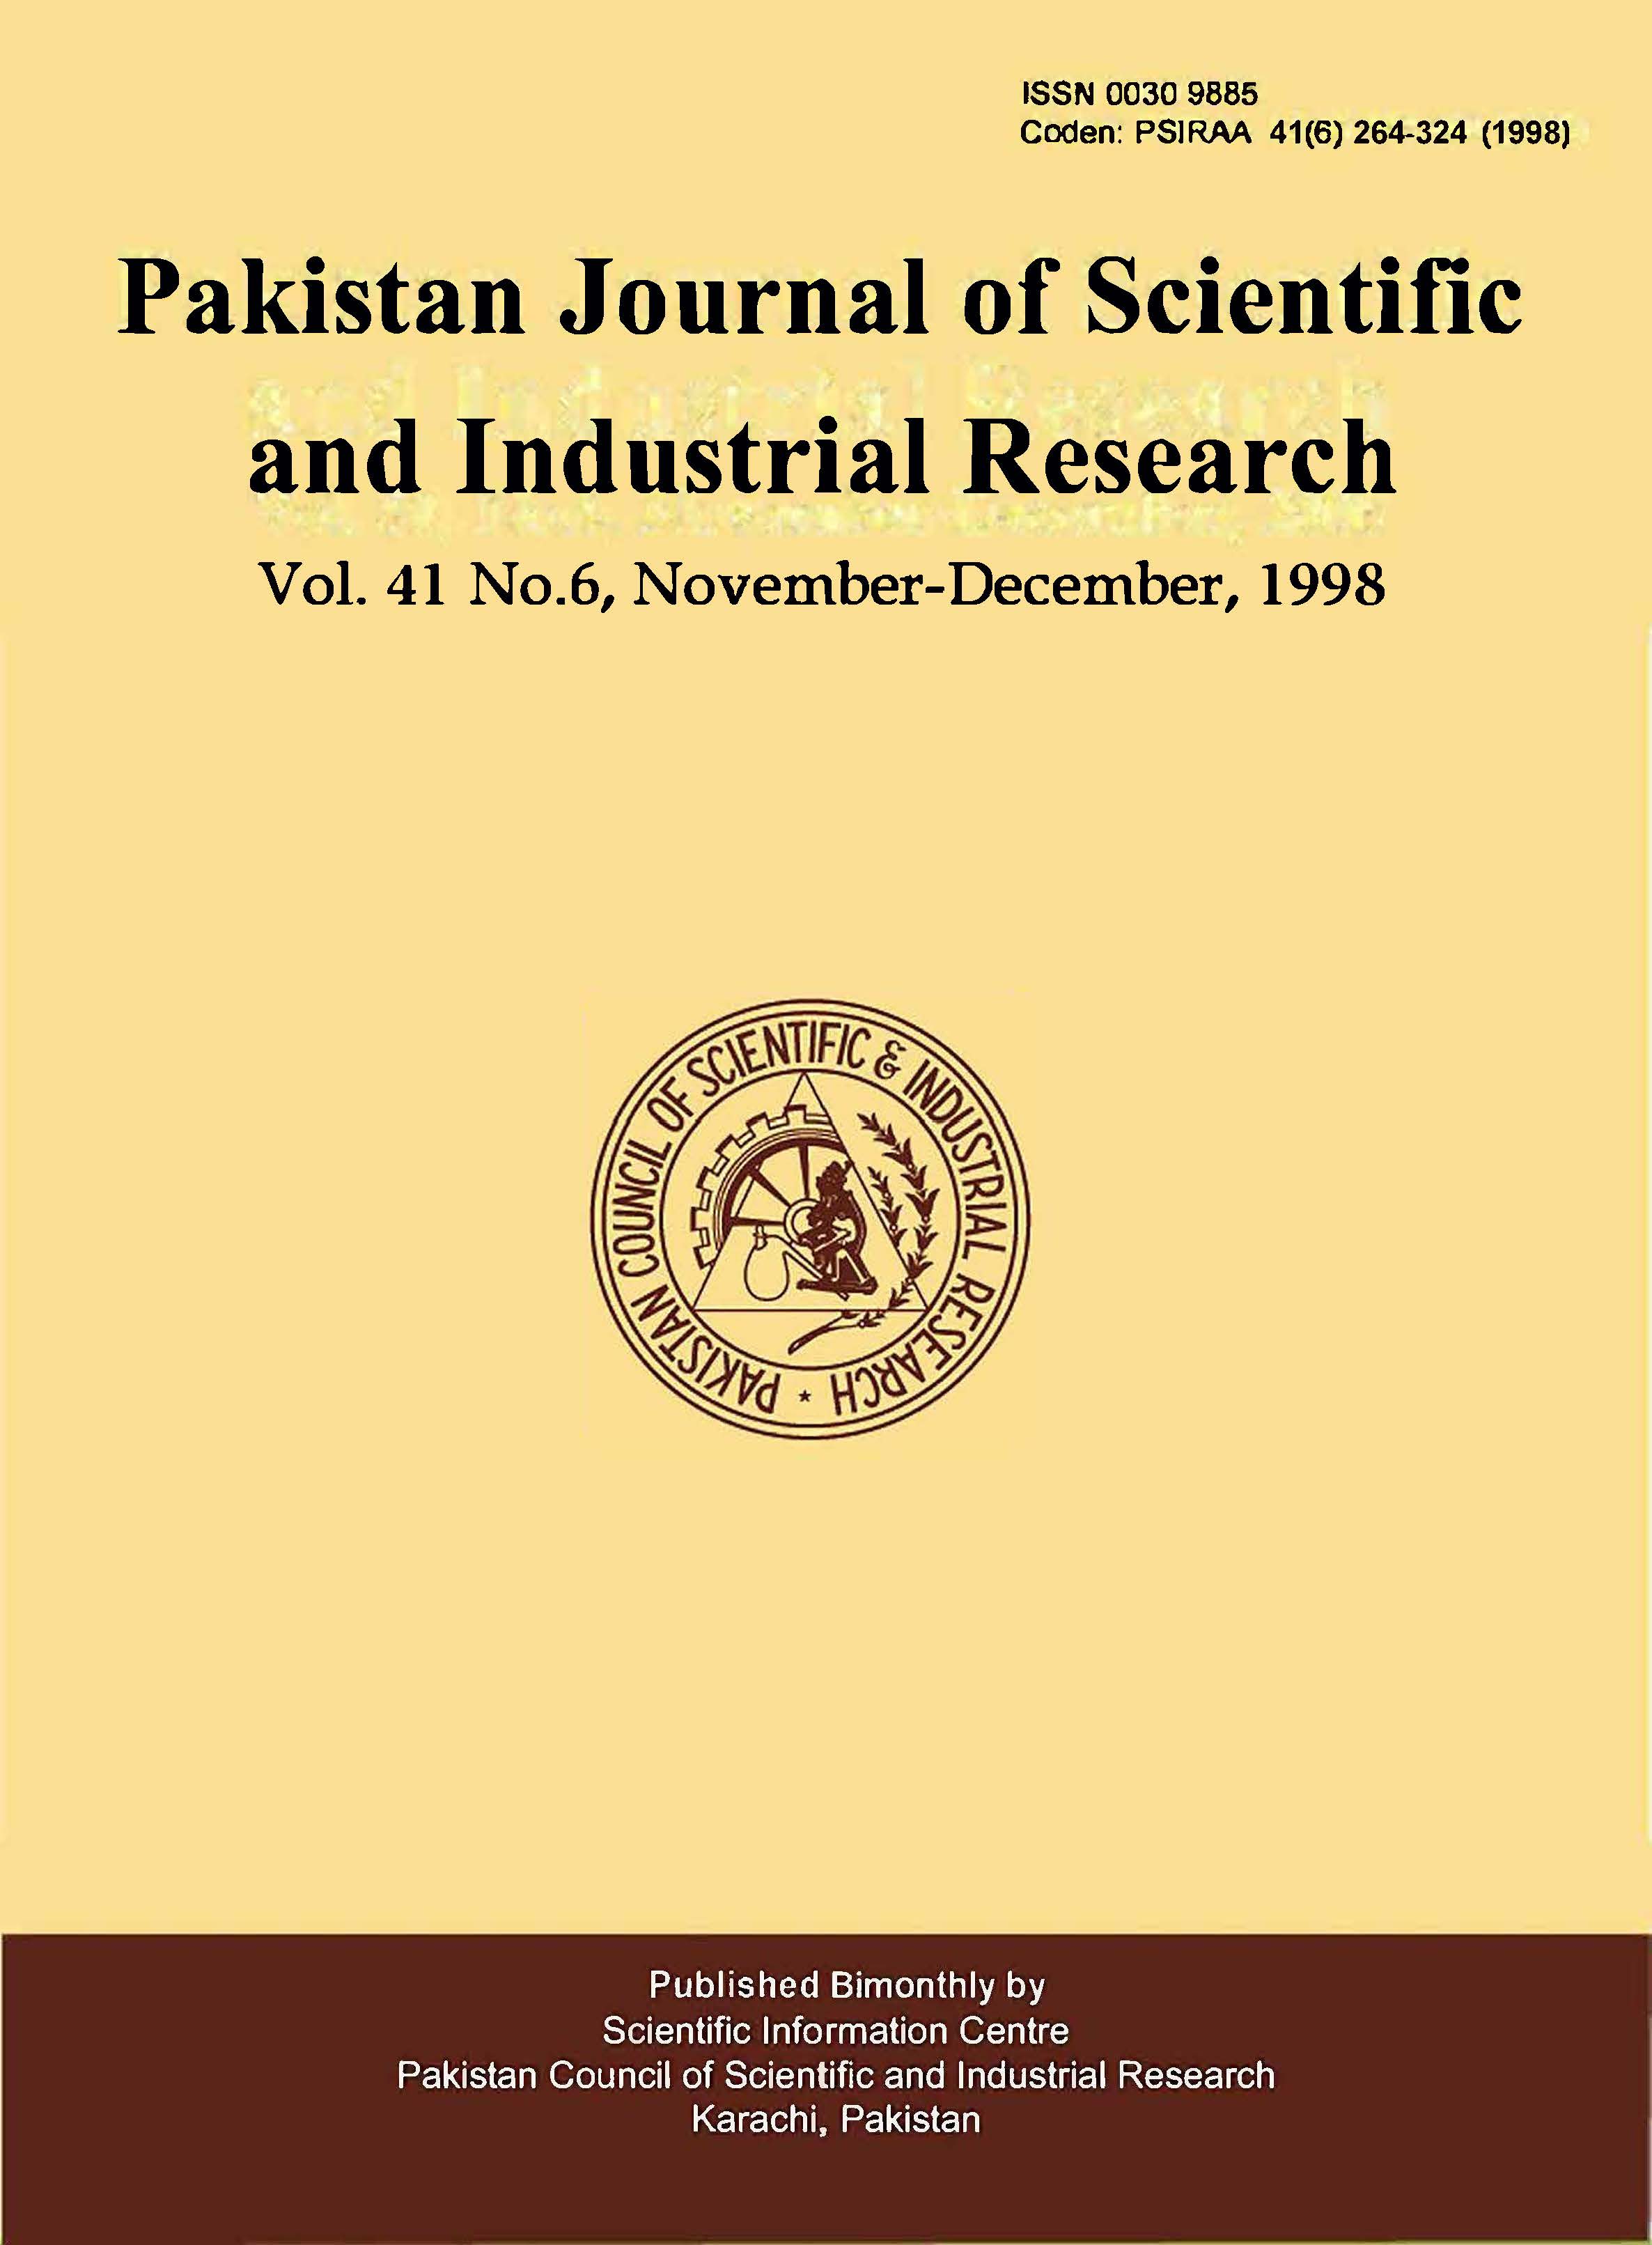 					View Vol. 41 No. 6 (1998): Pakistan Journal of Scientific and Industrial Research
				